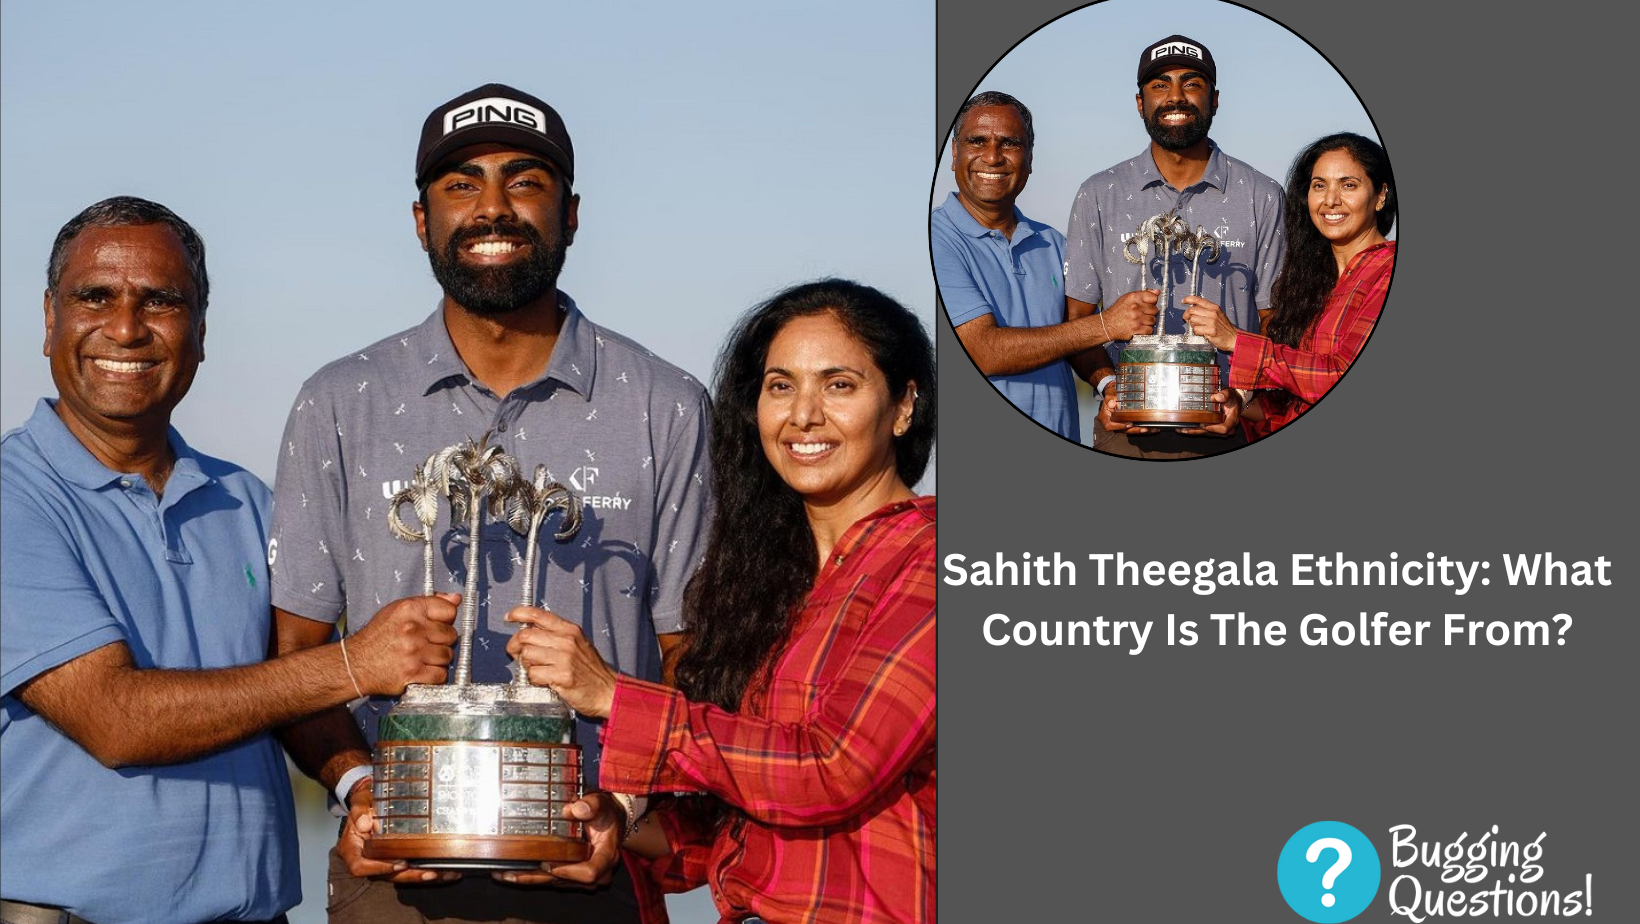 Sahith Theegala Ethnicity: What Country Is The Golfer From?